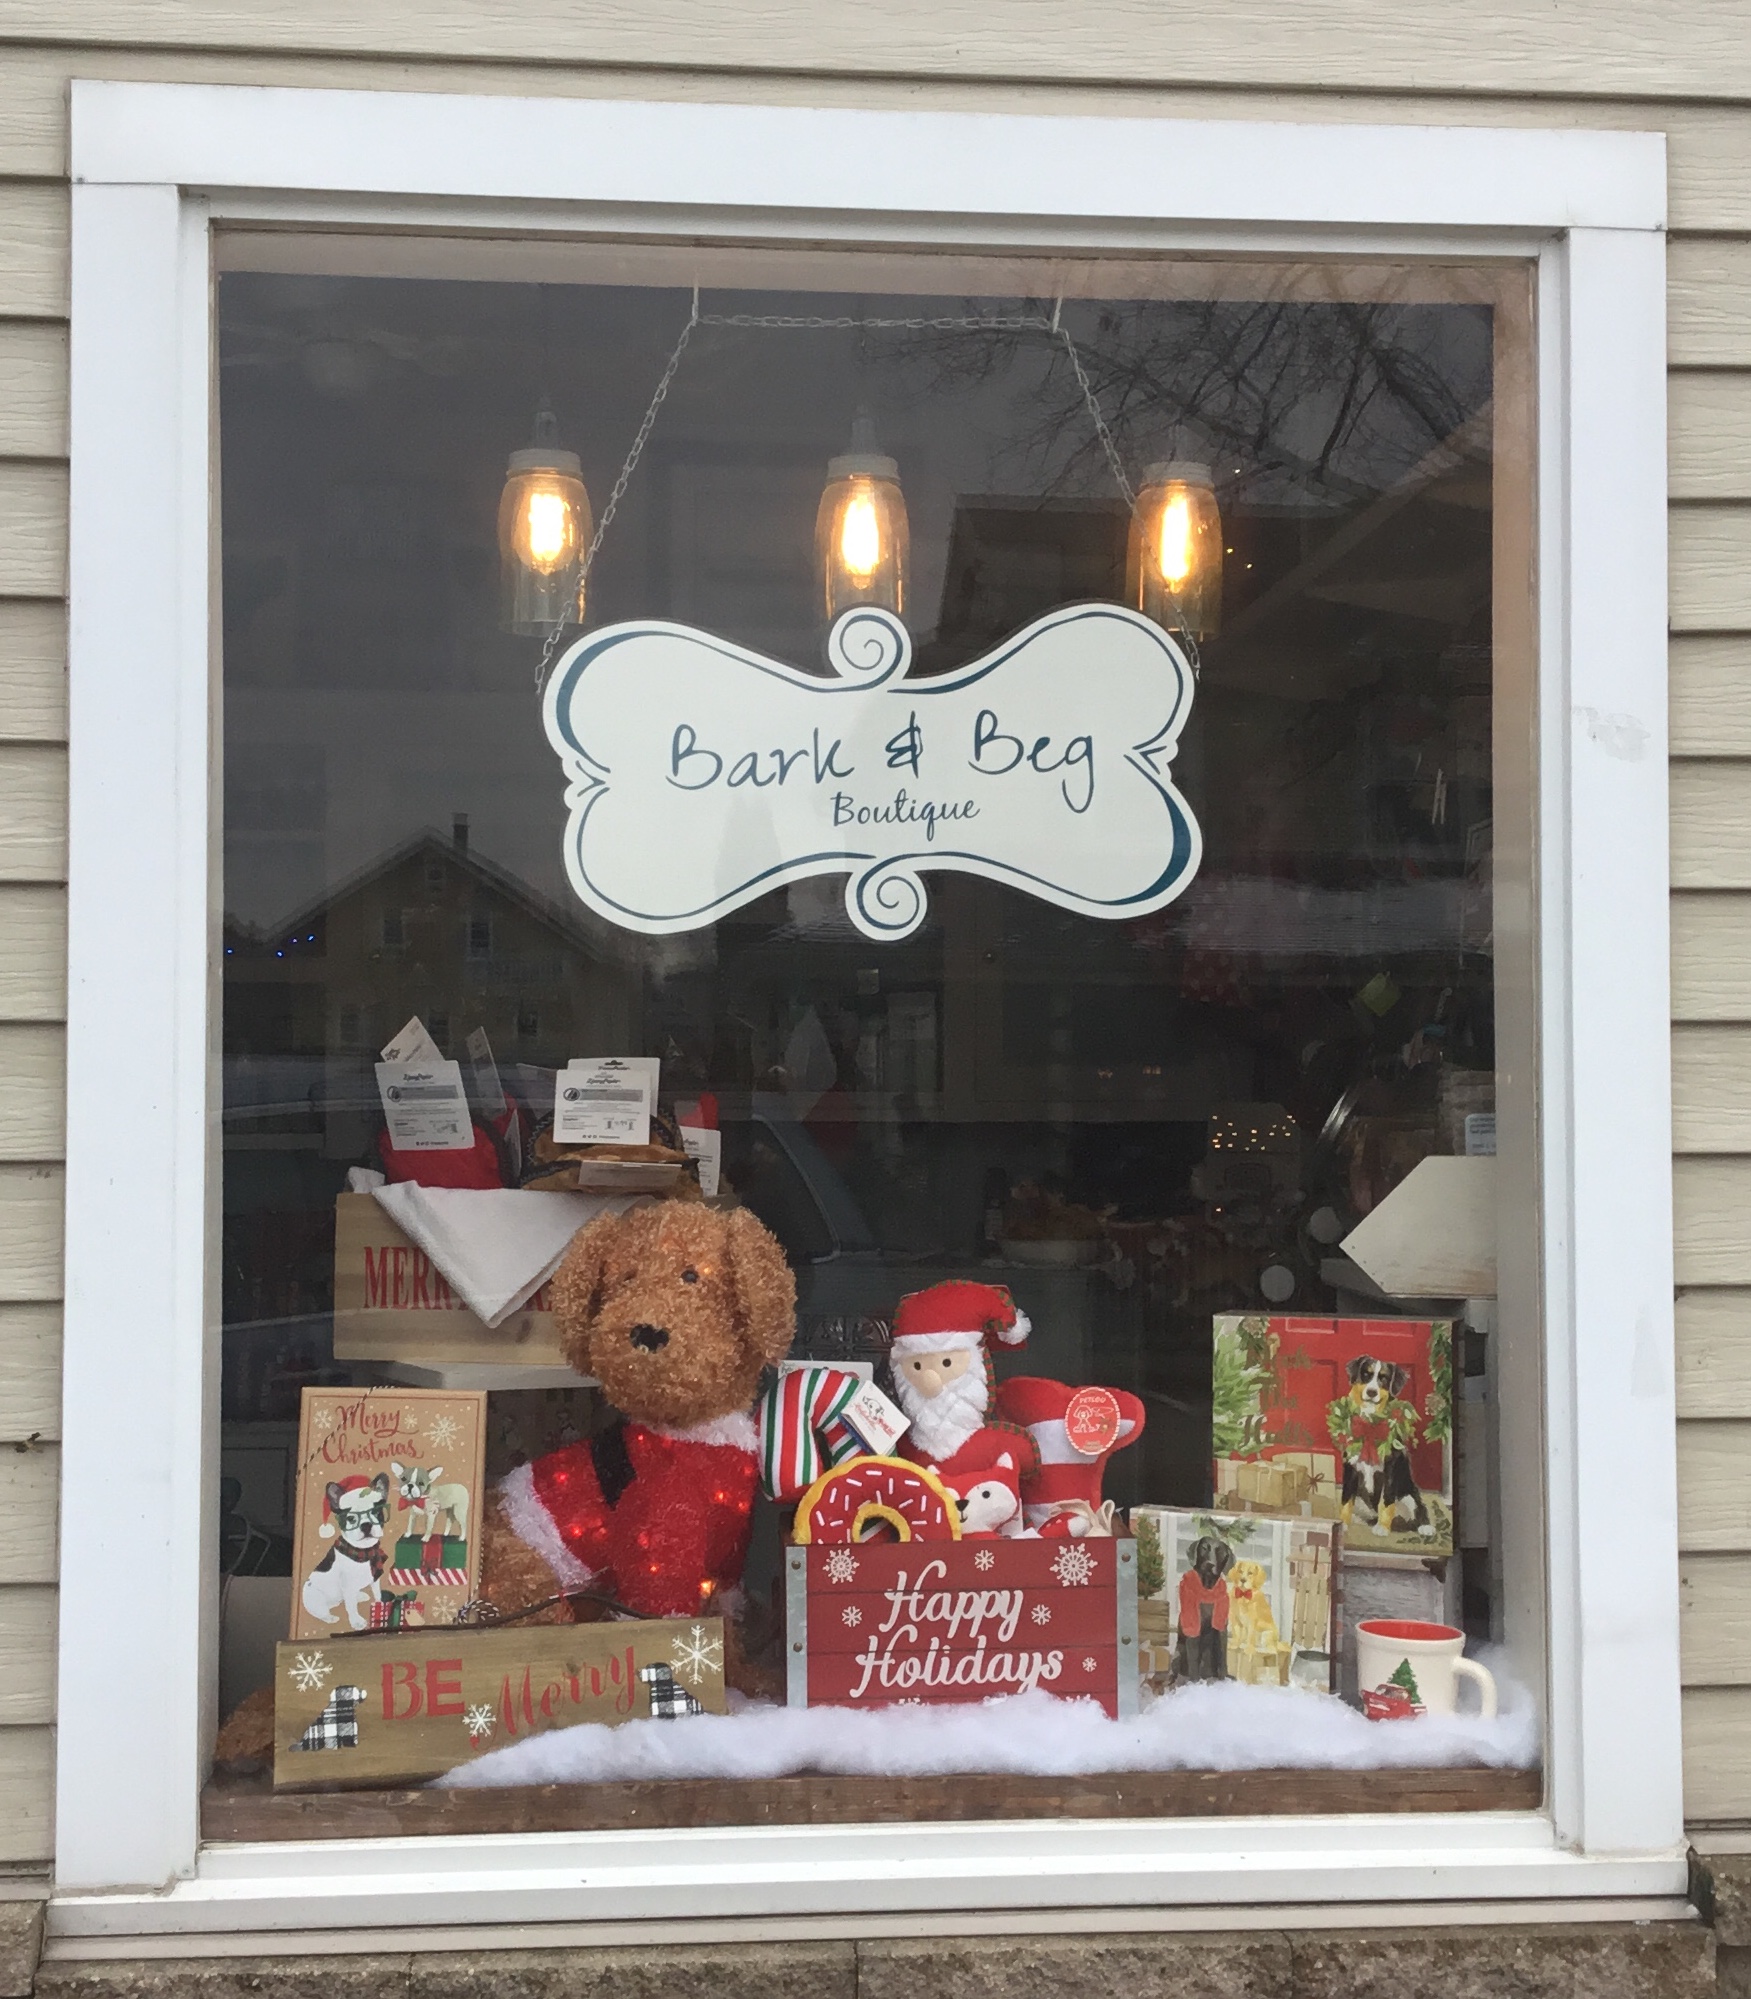 Bark and Beg Boutique